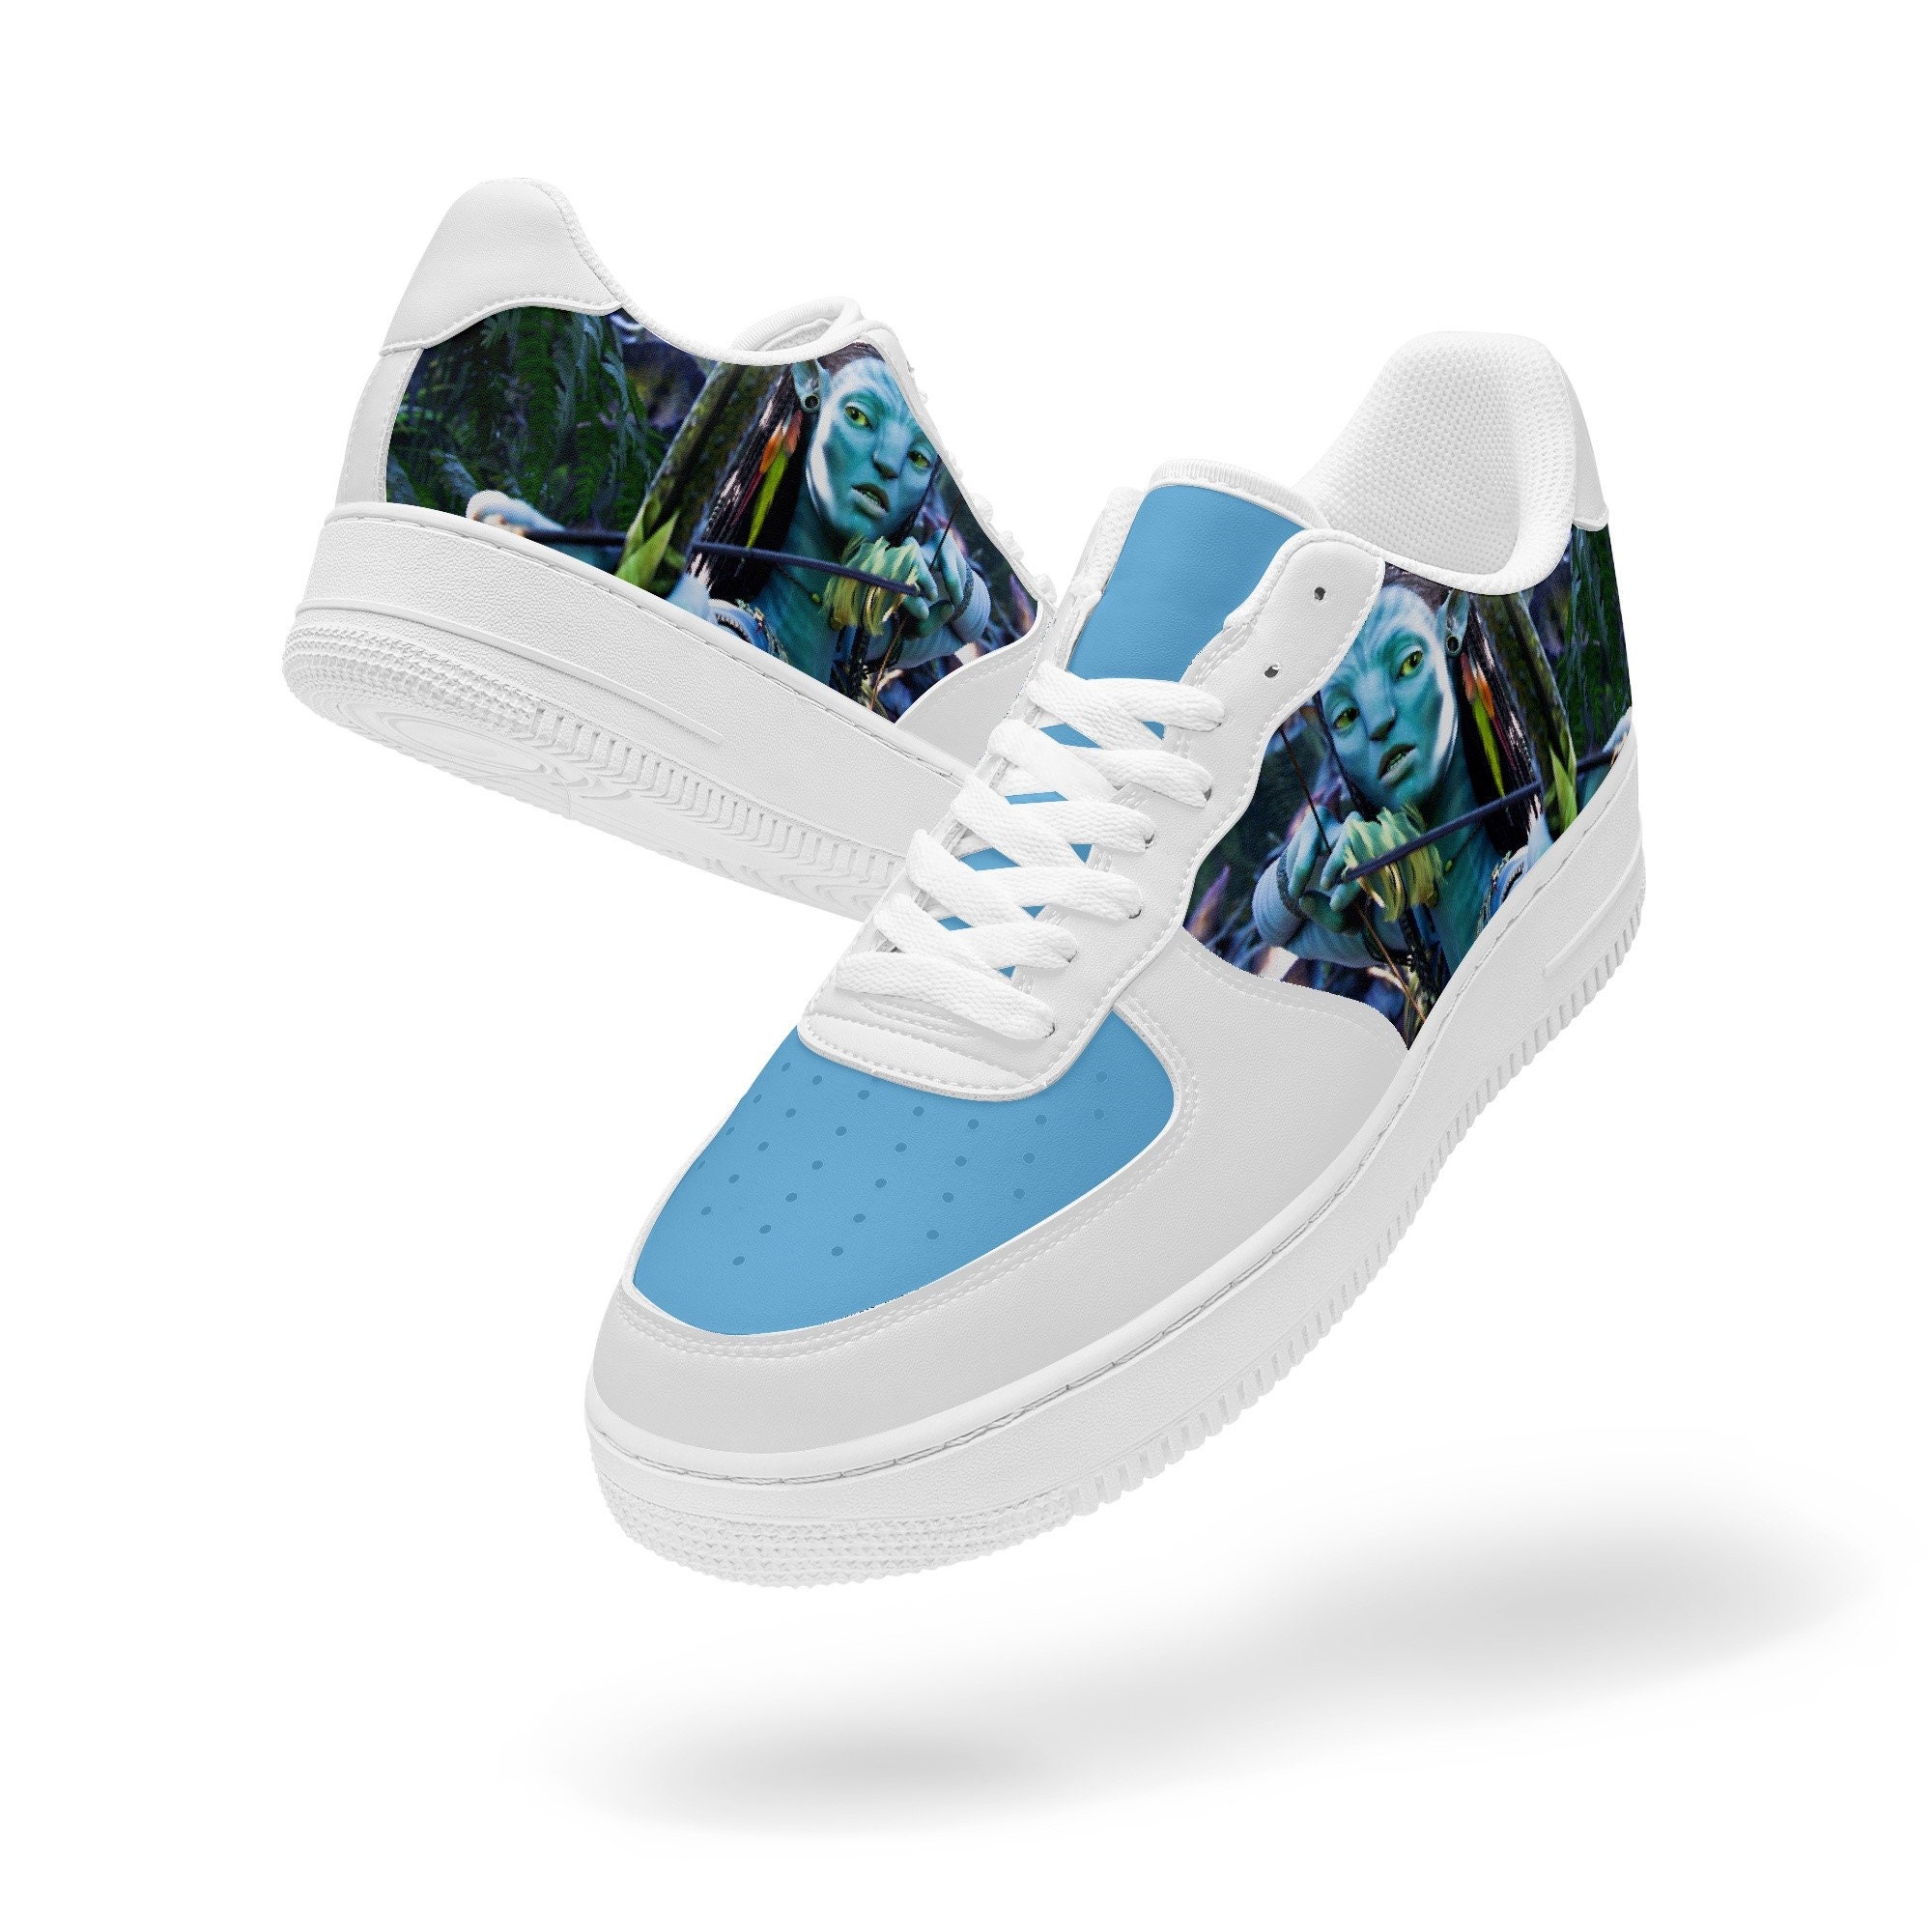 Avatar Shoes Sneakers Leather Low Tops for Men Women Kids - Etsy UK